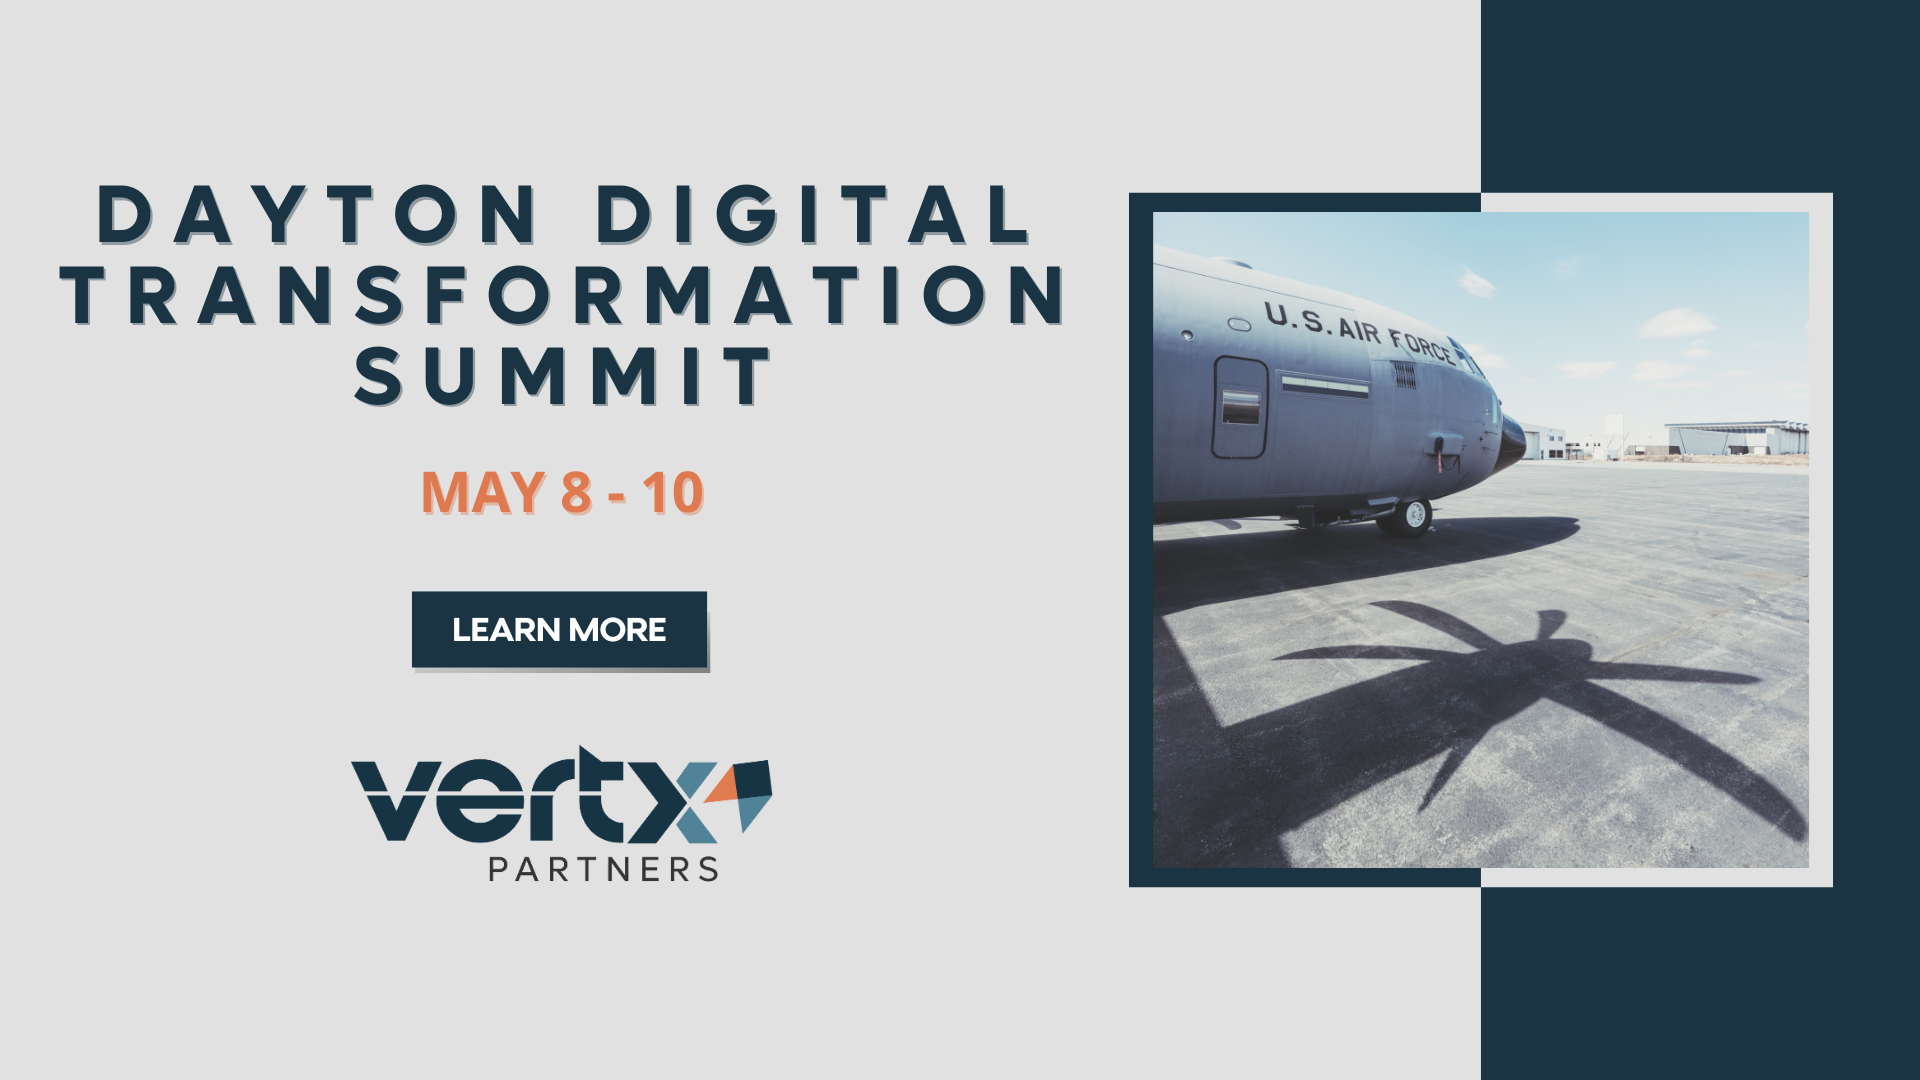 This graphic has the title Dayton Digital Transformation Summit with the date may 8 - 10 under it and a photo of an air force plane on the ground with a blue sky in the background.